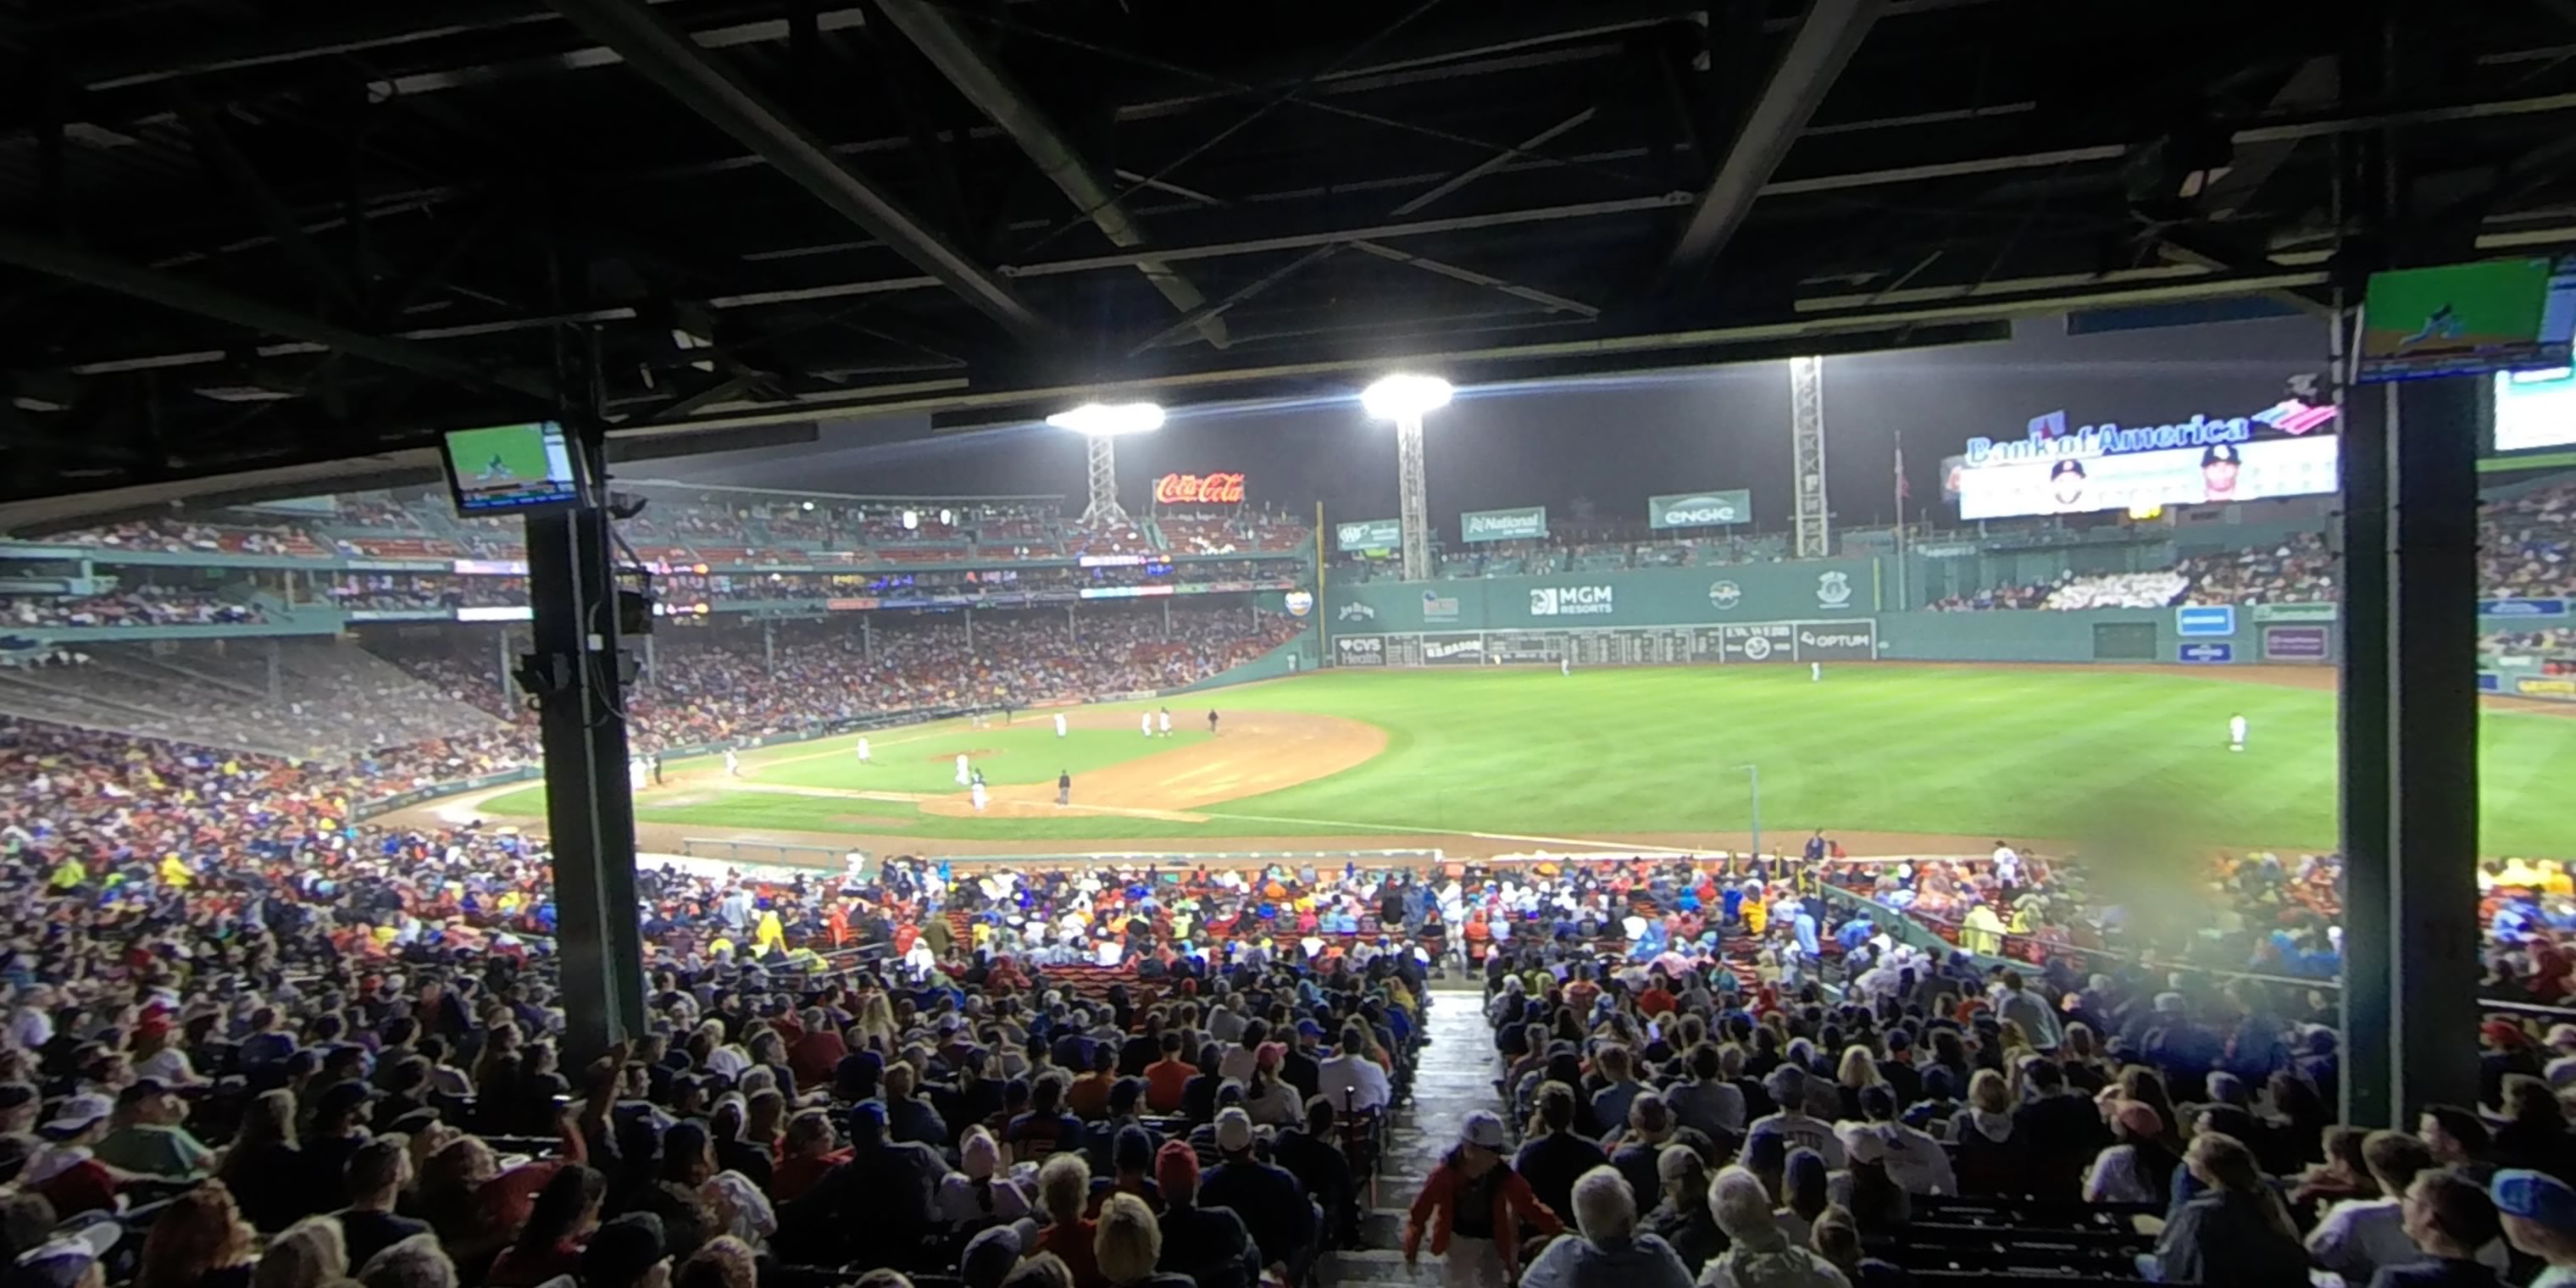 grandstand 11 panoramic seat view  for baseball - fenway park